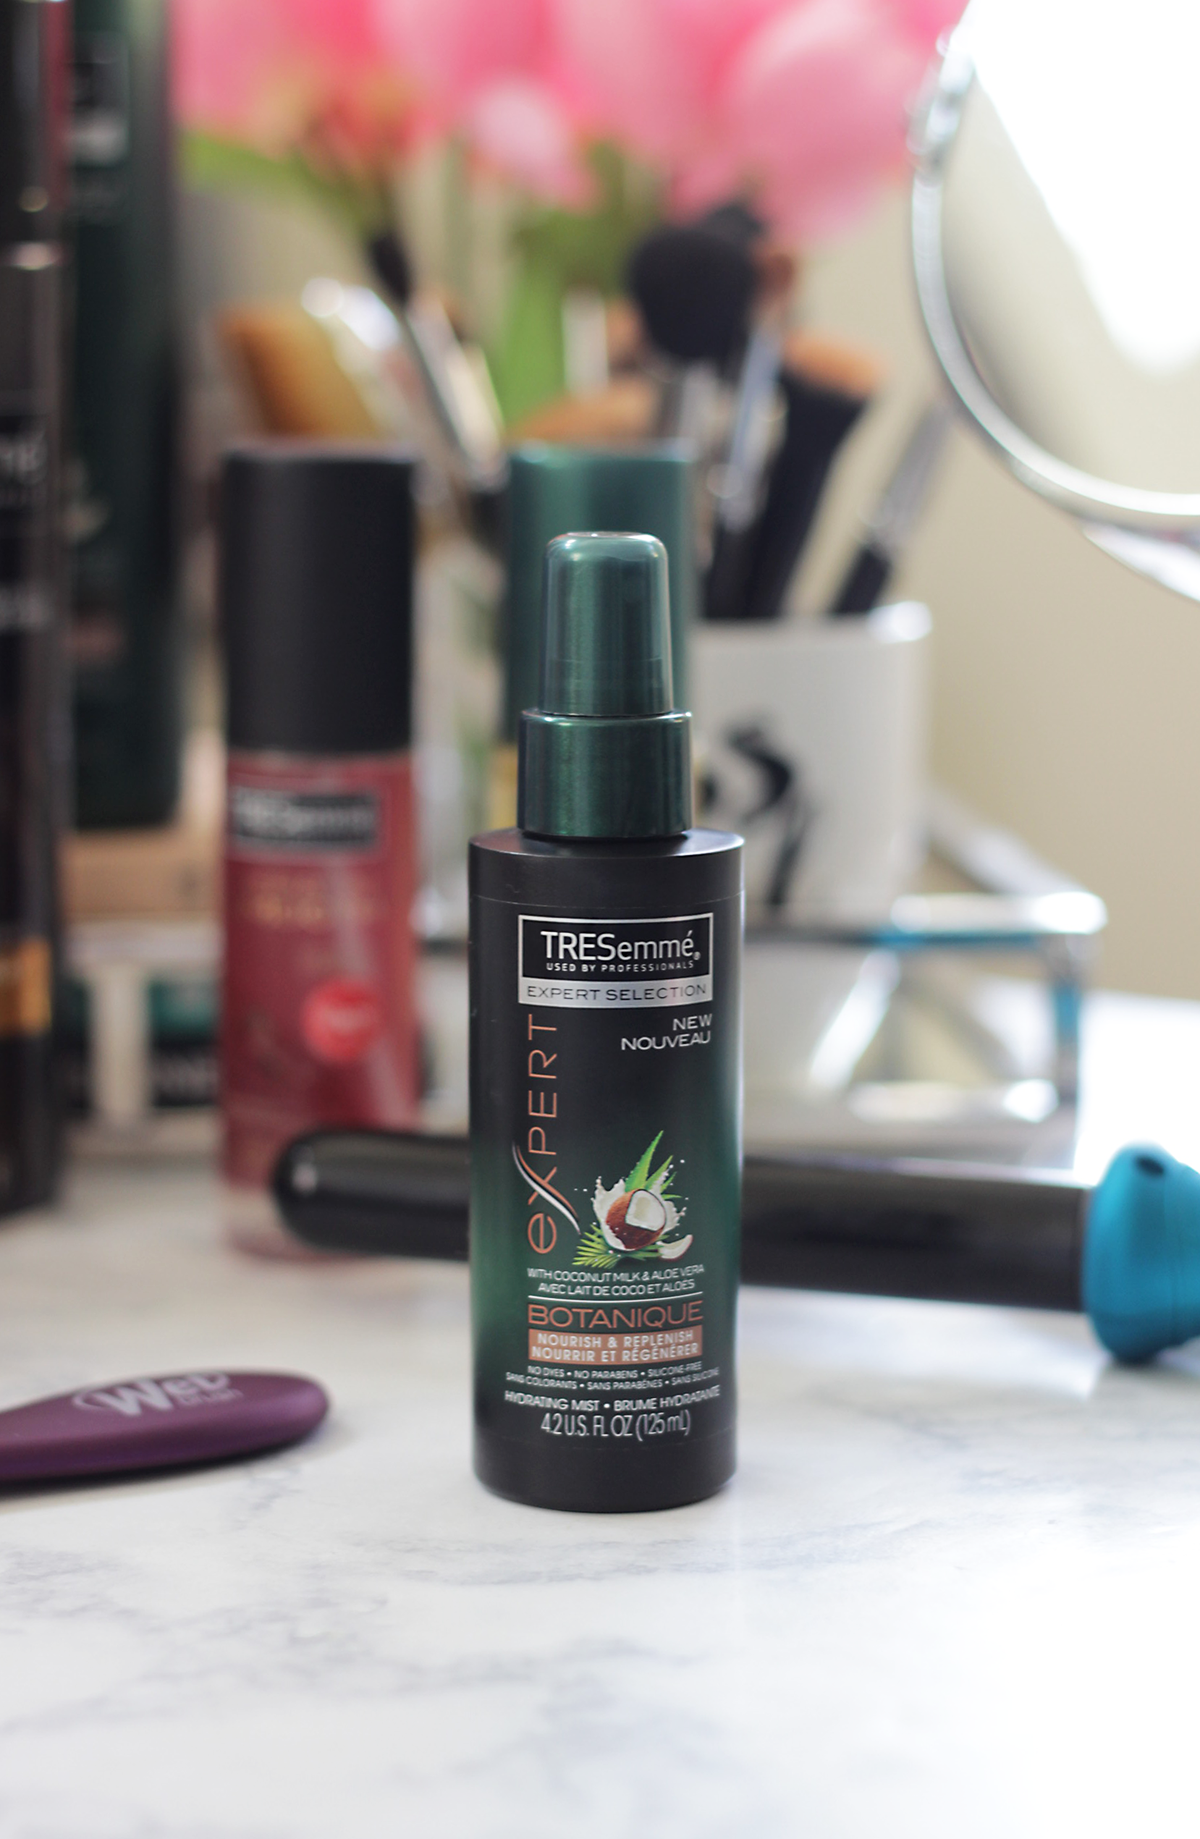 Is your hair looking dull, dry and tired this summer? Then you need to keep reading and see why Jamie is loving the new TRESemmé® Botanique Collection to bring her hair back to life. TRESemmé® Botanique Haircare is rocking the shelves this summer and giving your hair life instantly. - TRESemme - TRESemmé® Botanique- The Hair Care Edit- Makeup Life and Love